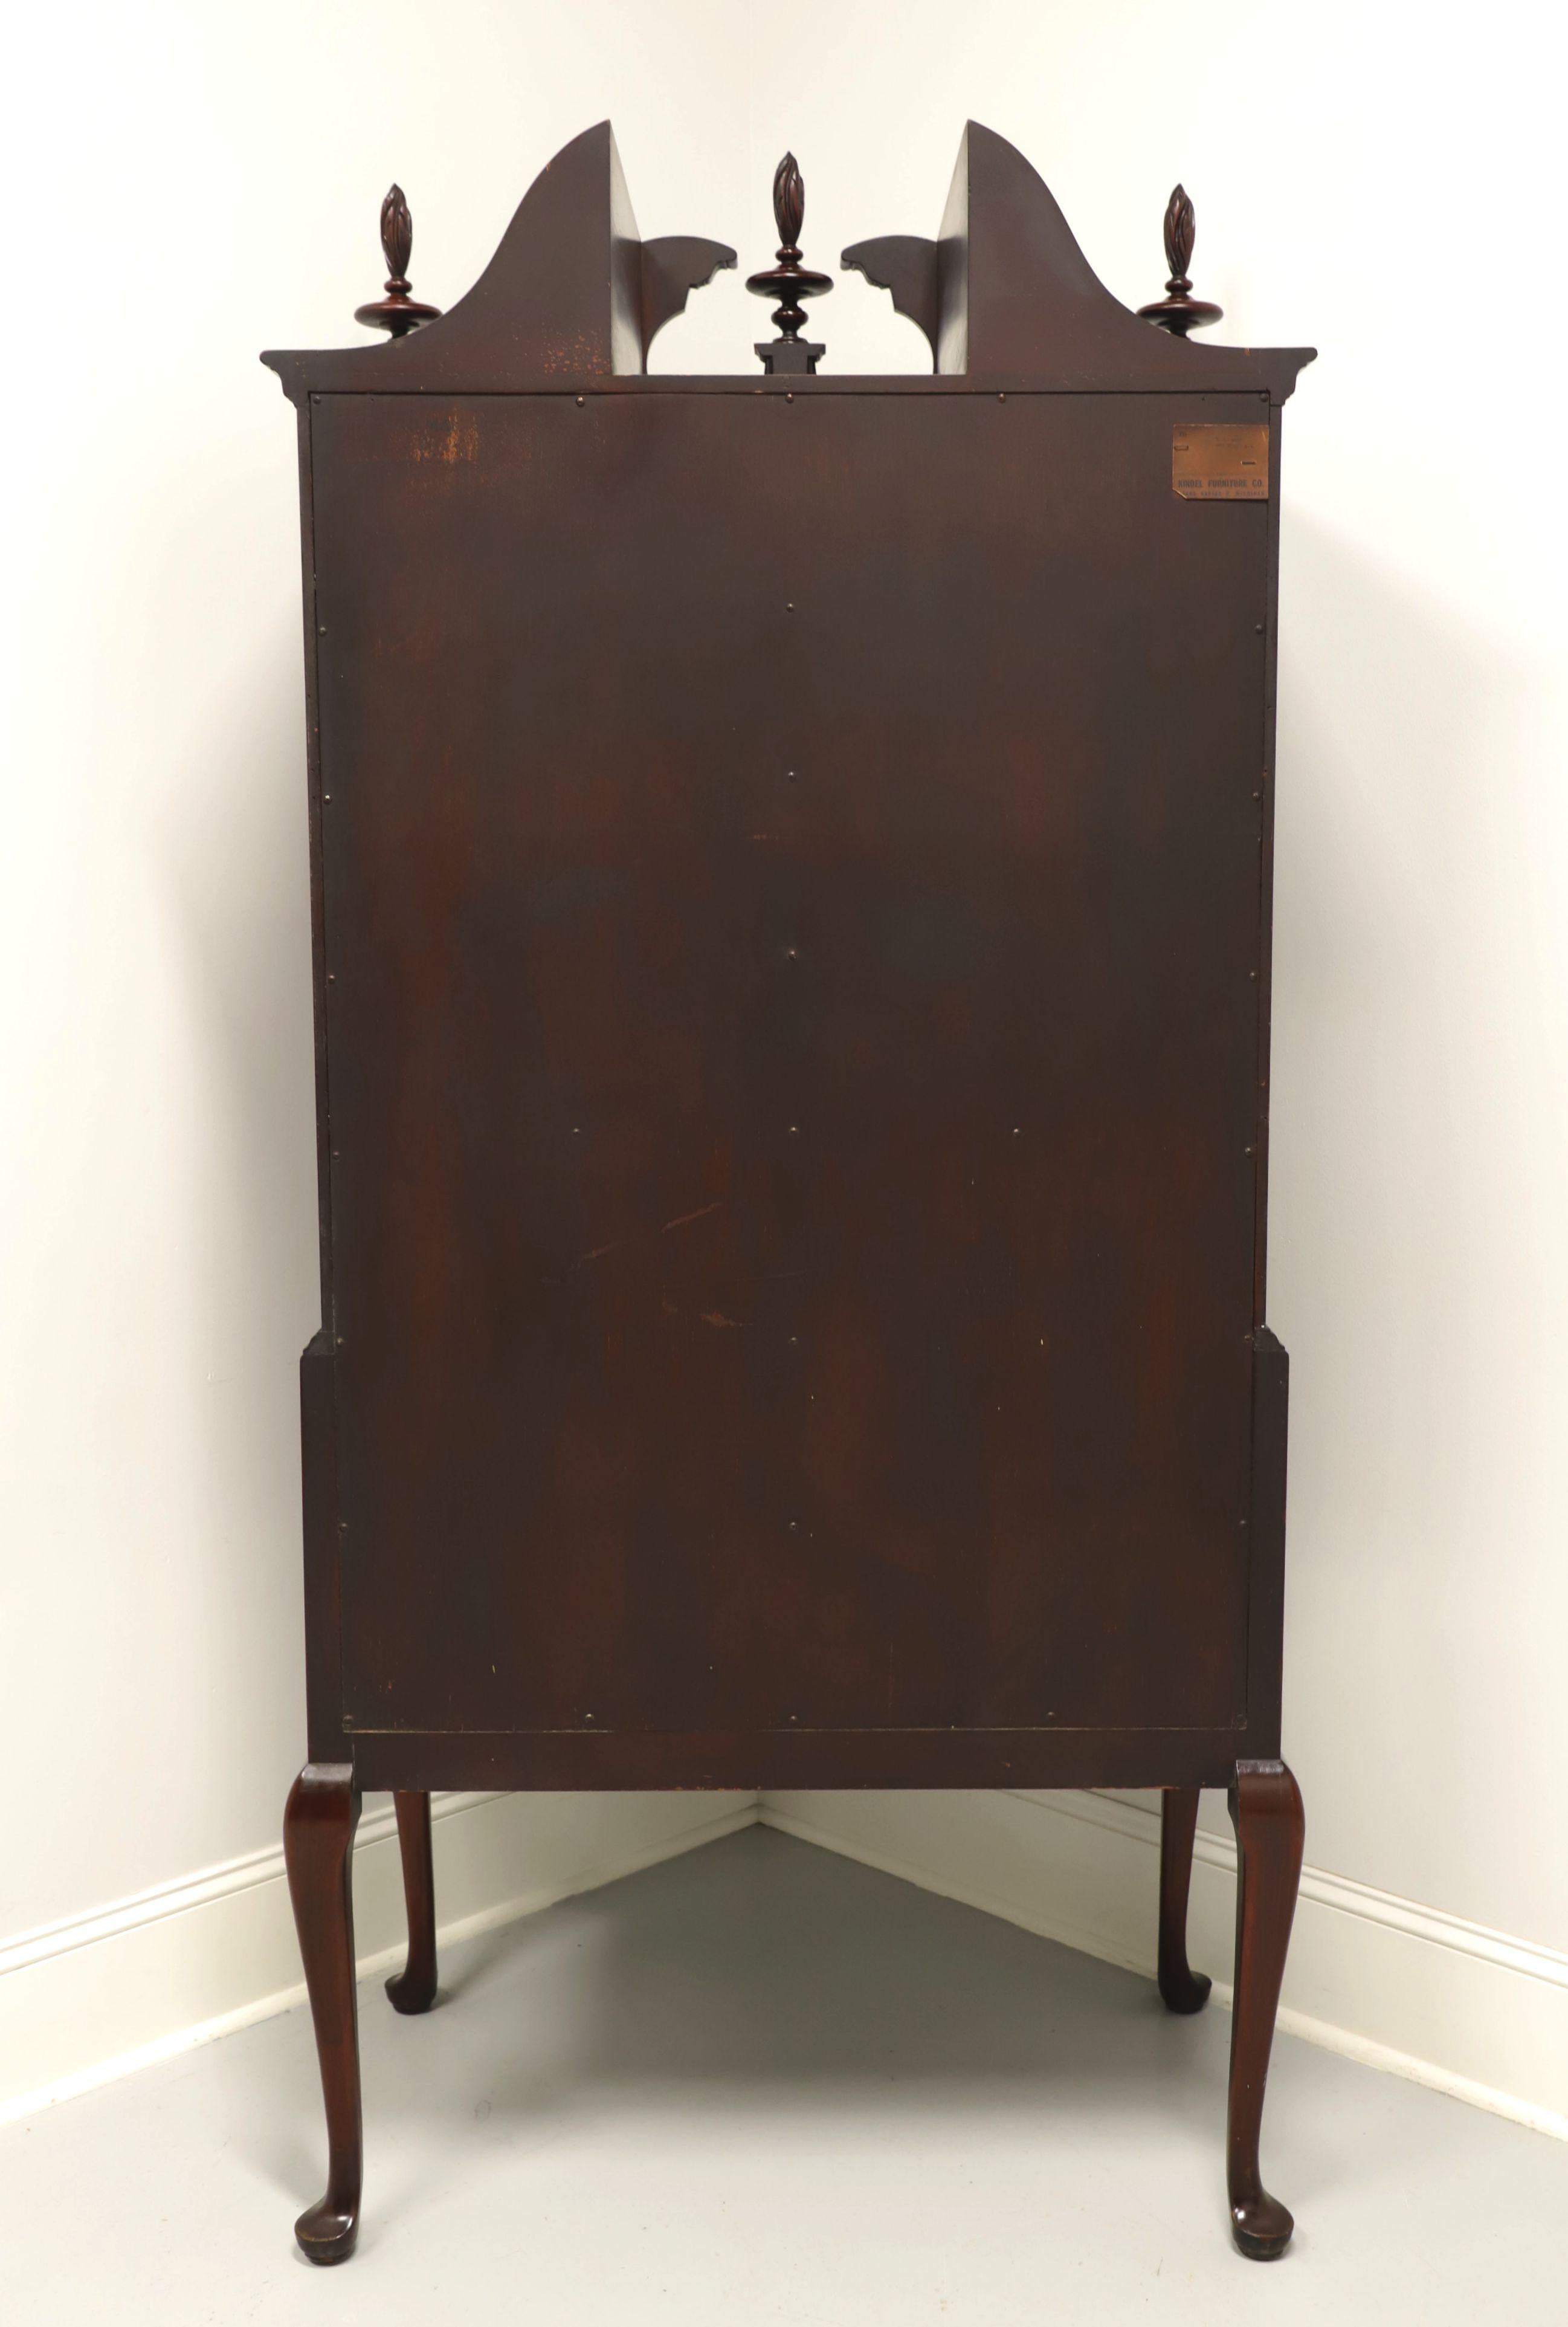 KINDEL Mahogany Queen Anne Style Highboy Chest In Good Condition For Sale In Charlotte, NC